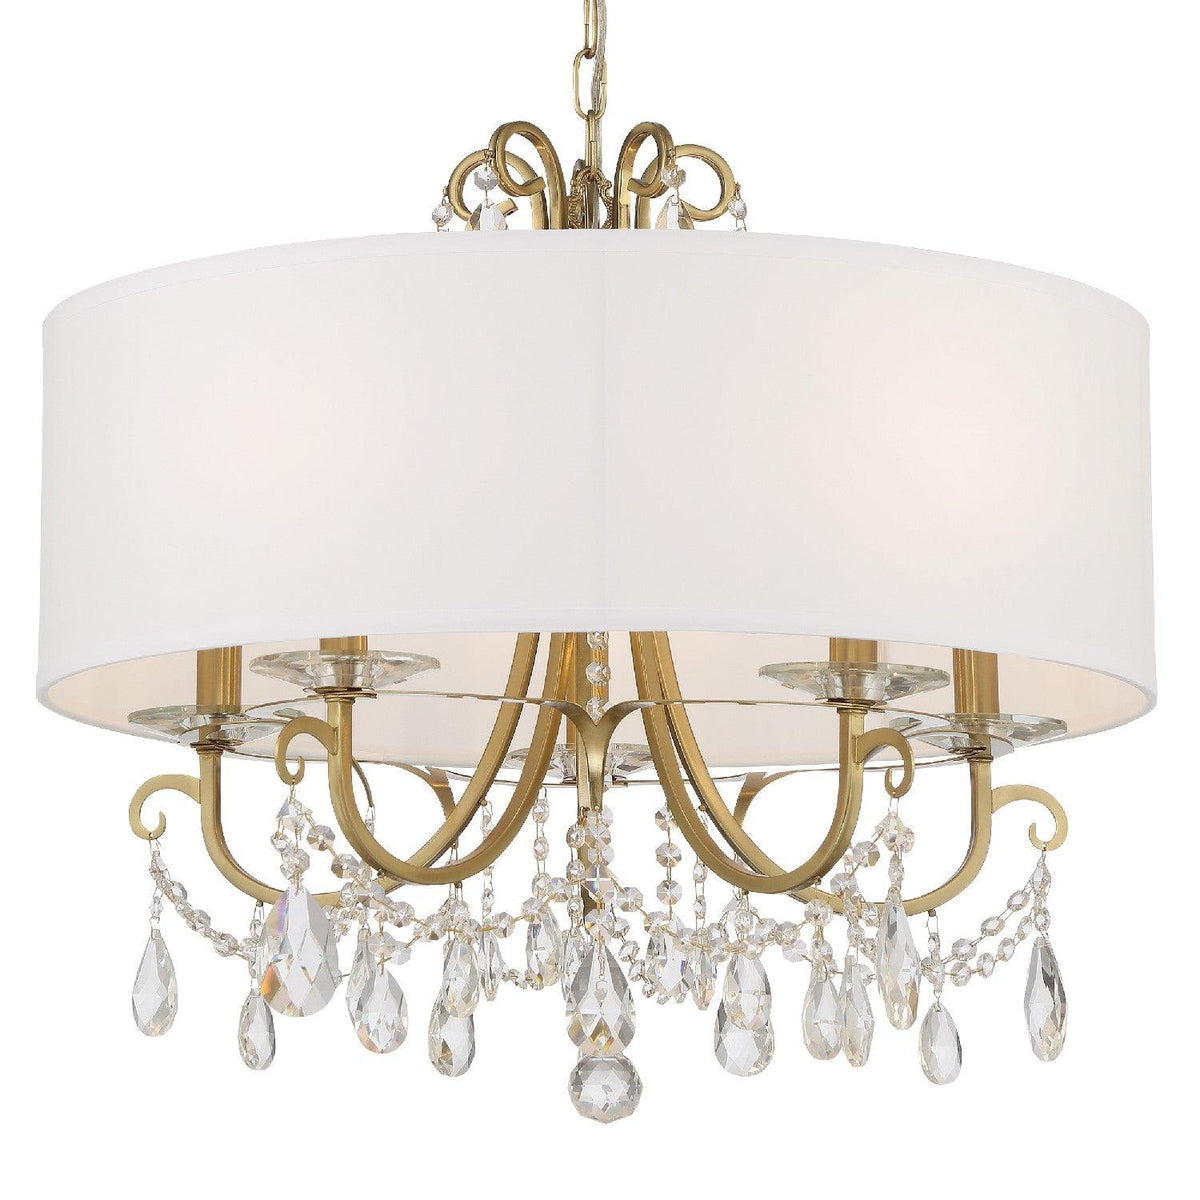 Crystorama - Othello Drum Shade Chandelier - 6625-VG-CL-S | Montreal Lighting & Hardware